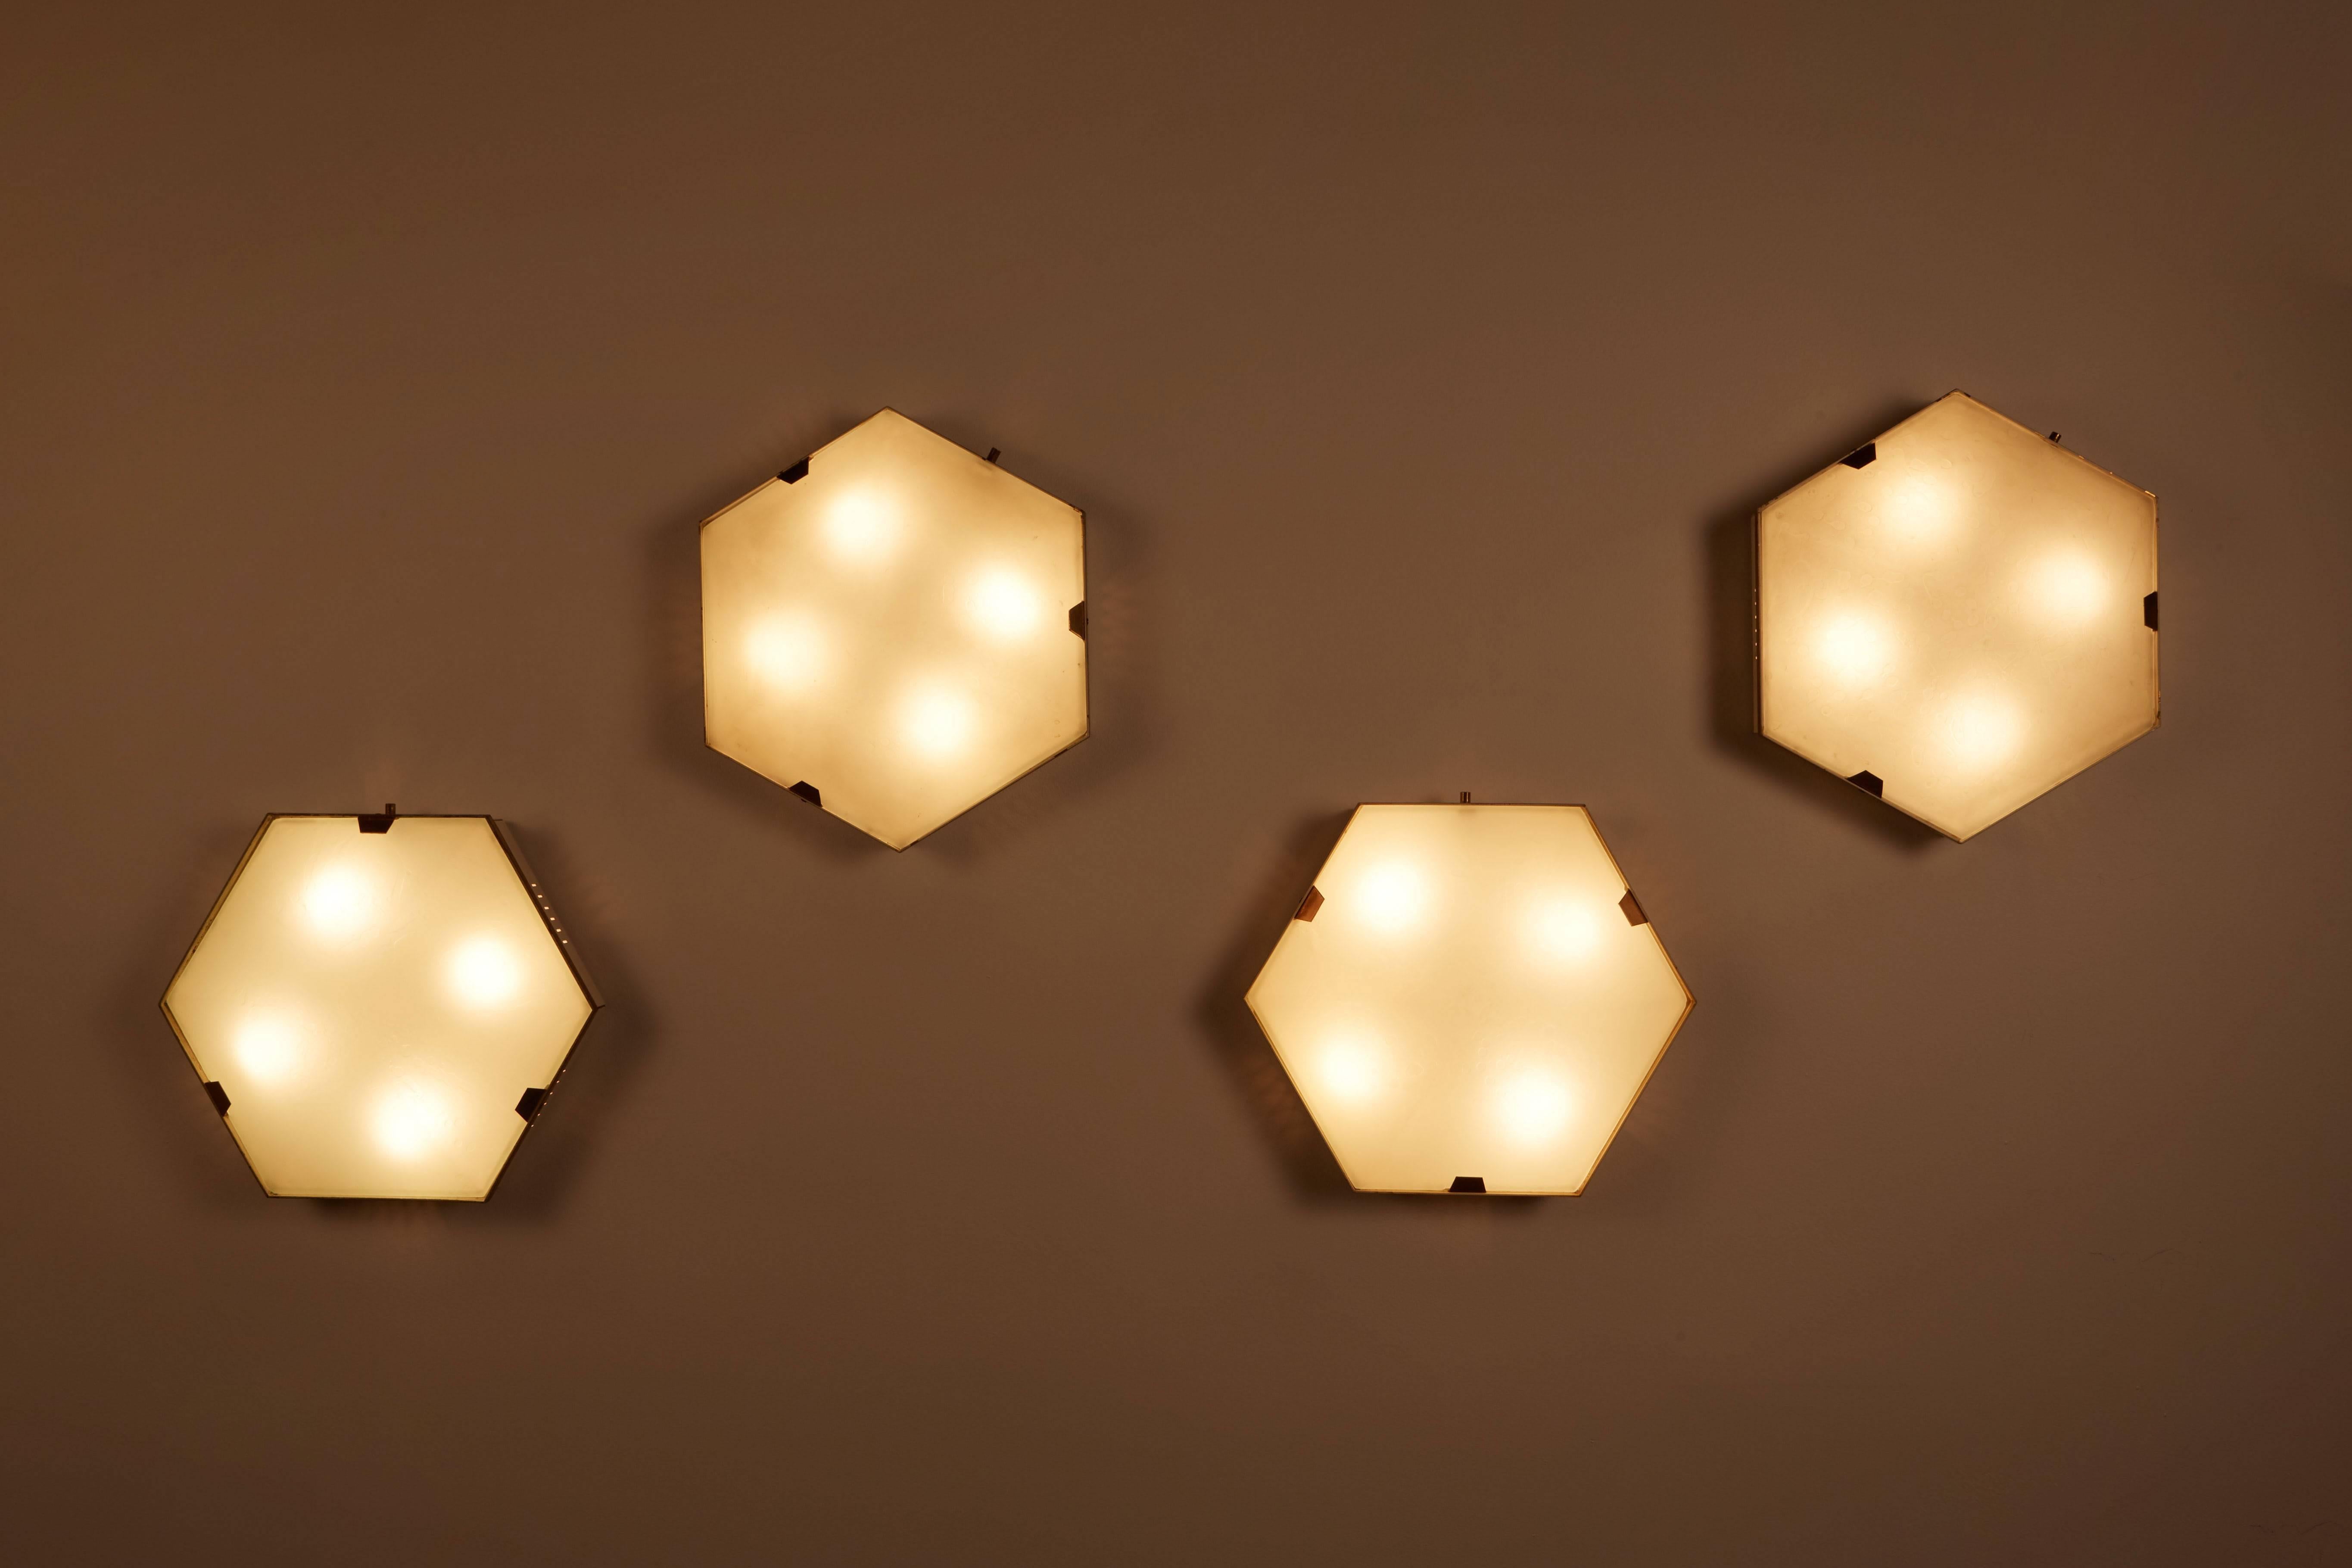 Single hexagonal ceiling/wall lights manufactured by Stilnovo in Italy, circa 1950s. Brass, painted aluminum and textured glass. Sold and priced individually. Wired for US junction boxes. Retains original manufacturers label. Sconce takes one E27